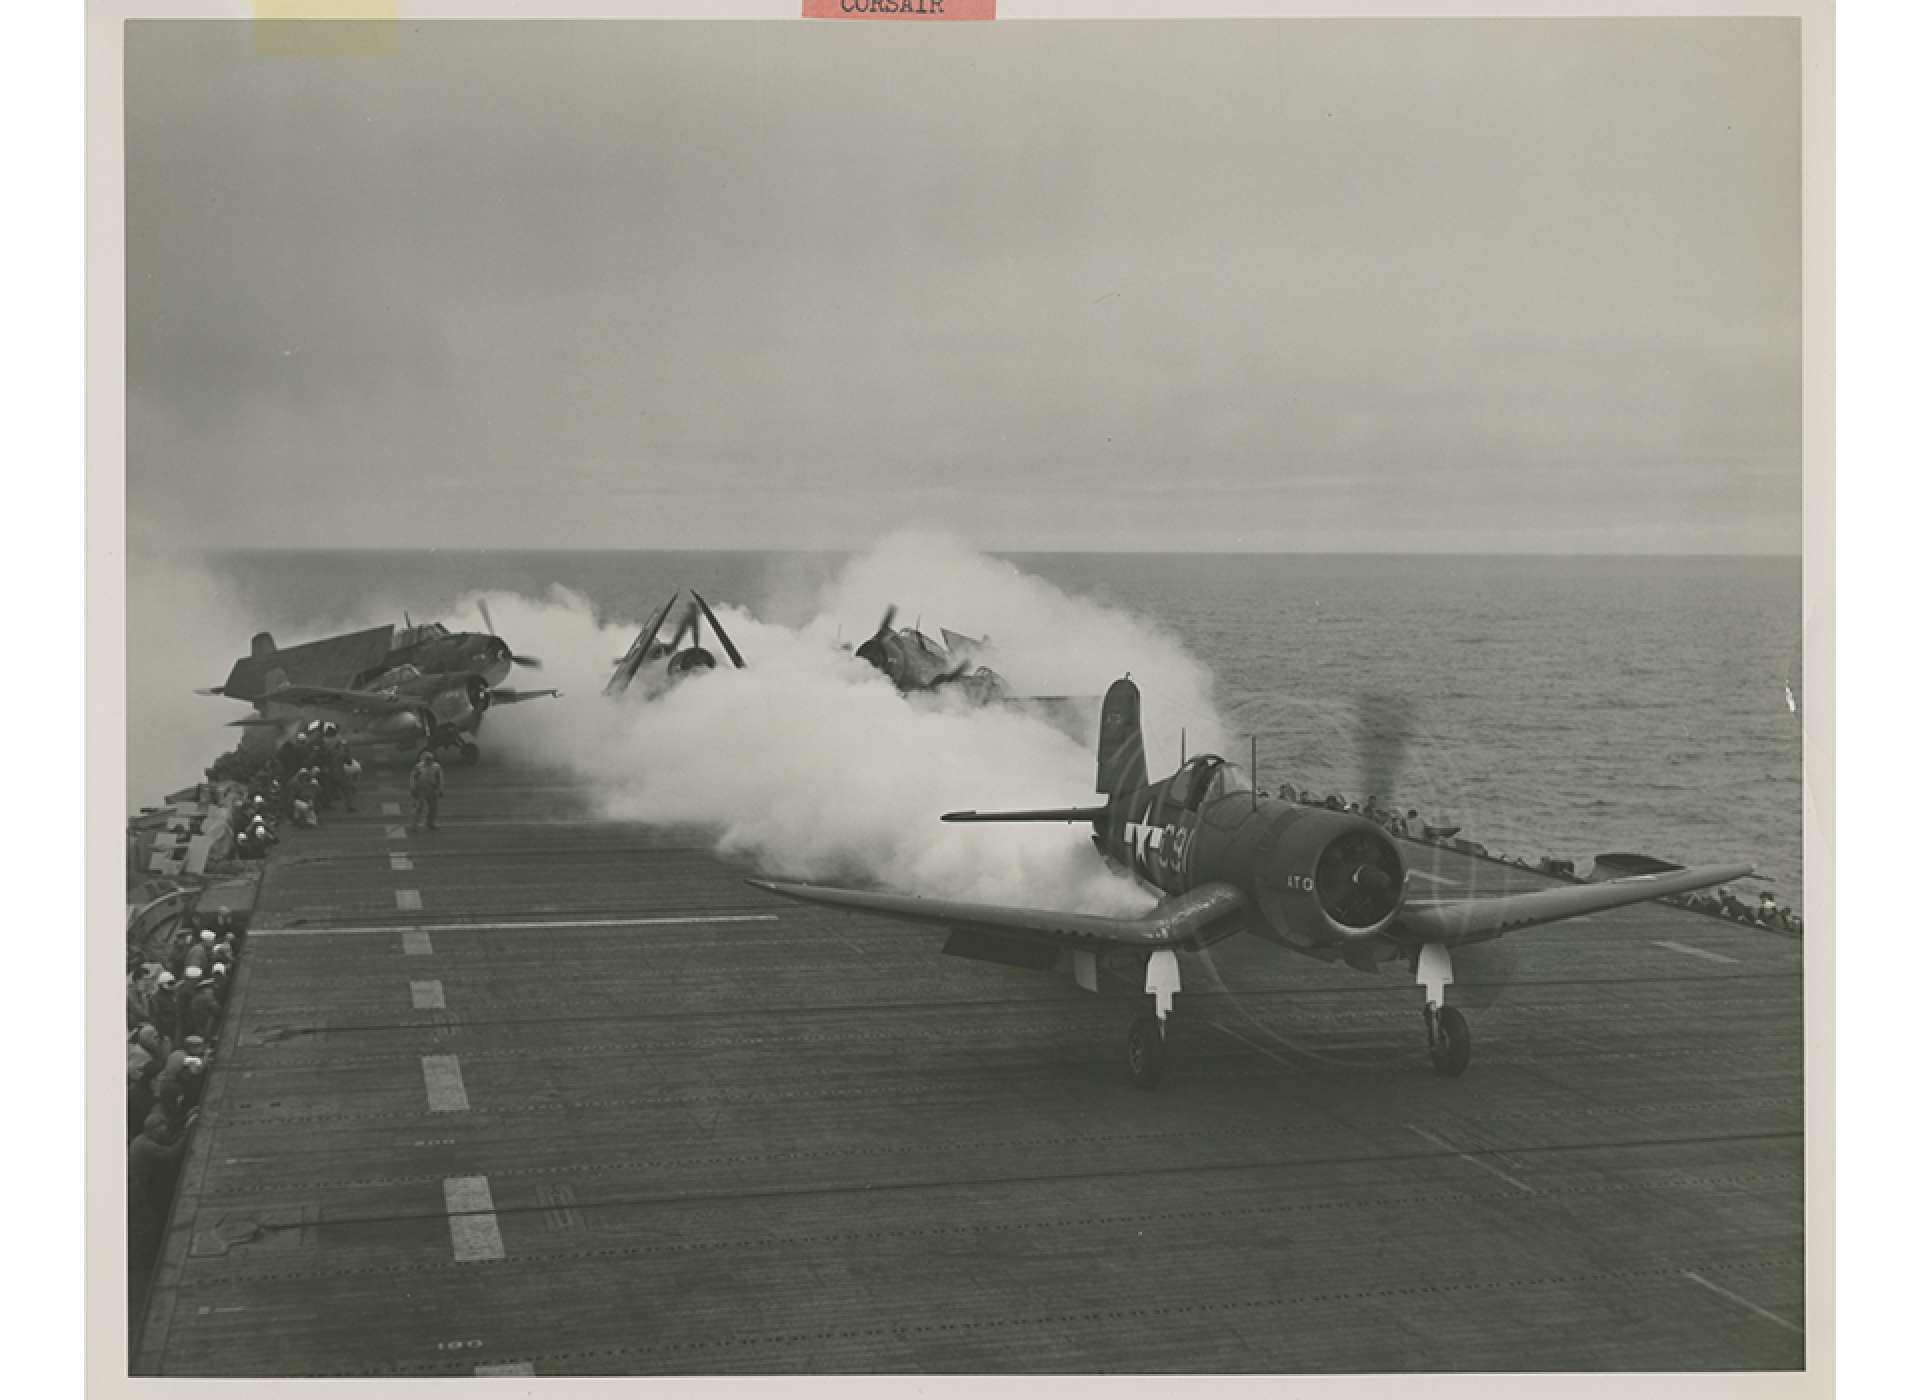 A Corsair testing rocket assisted takeoff from an aircraft carrier in September 1944. Gift In Memory of Charles Ives, 2011.102.450